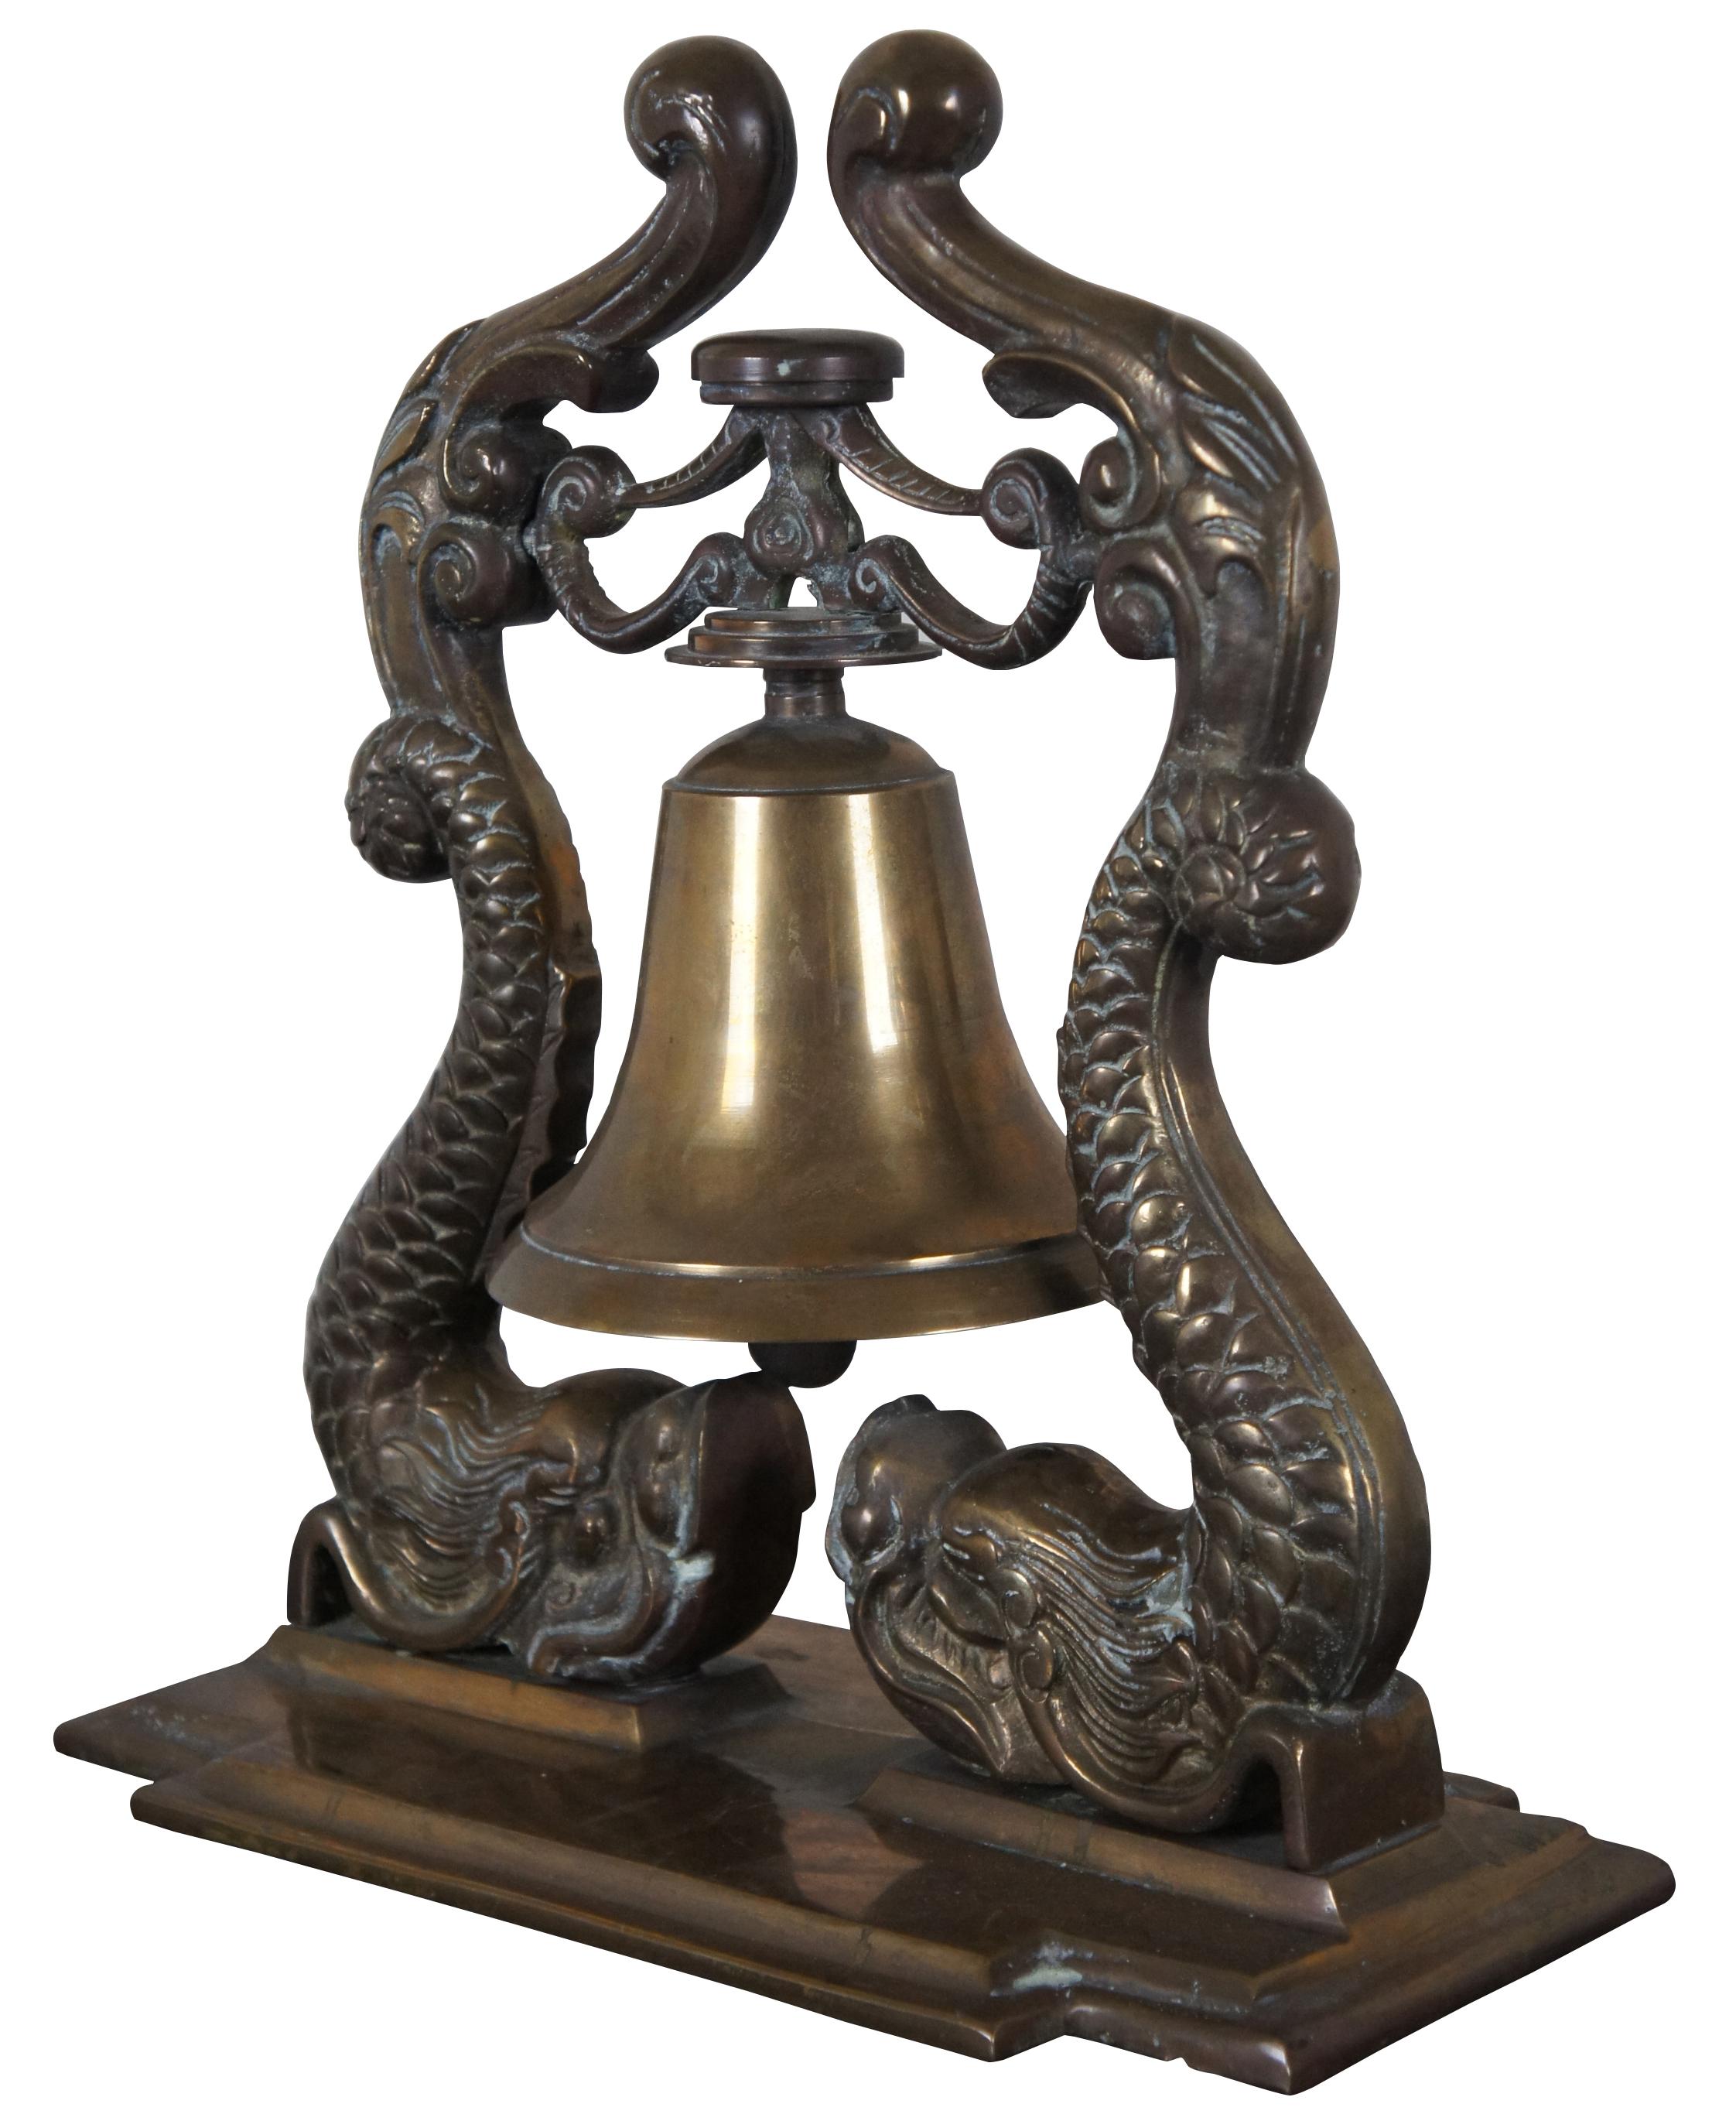 Ornate brass navy bell
Features two dolphins supporting a bell on intergal molded base. Bell is functional, and has loud tone. 
This is the type of bell that was used on ships in the 19th century and was adopted by the US Navy as an insignia in